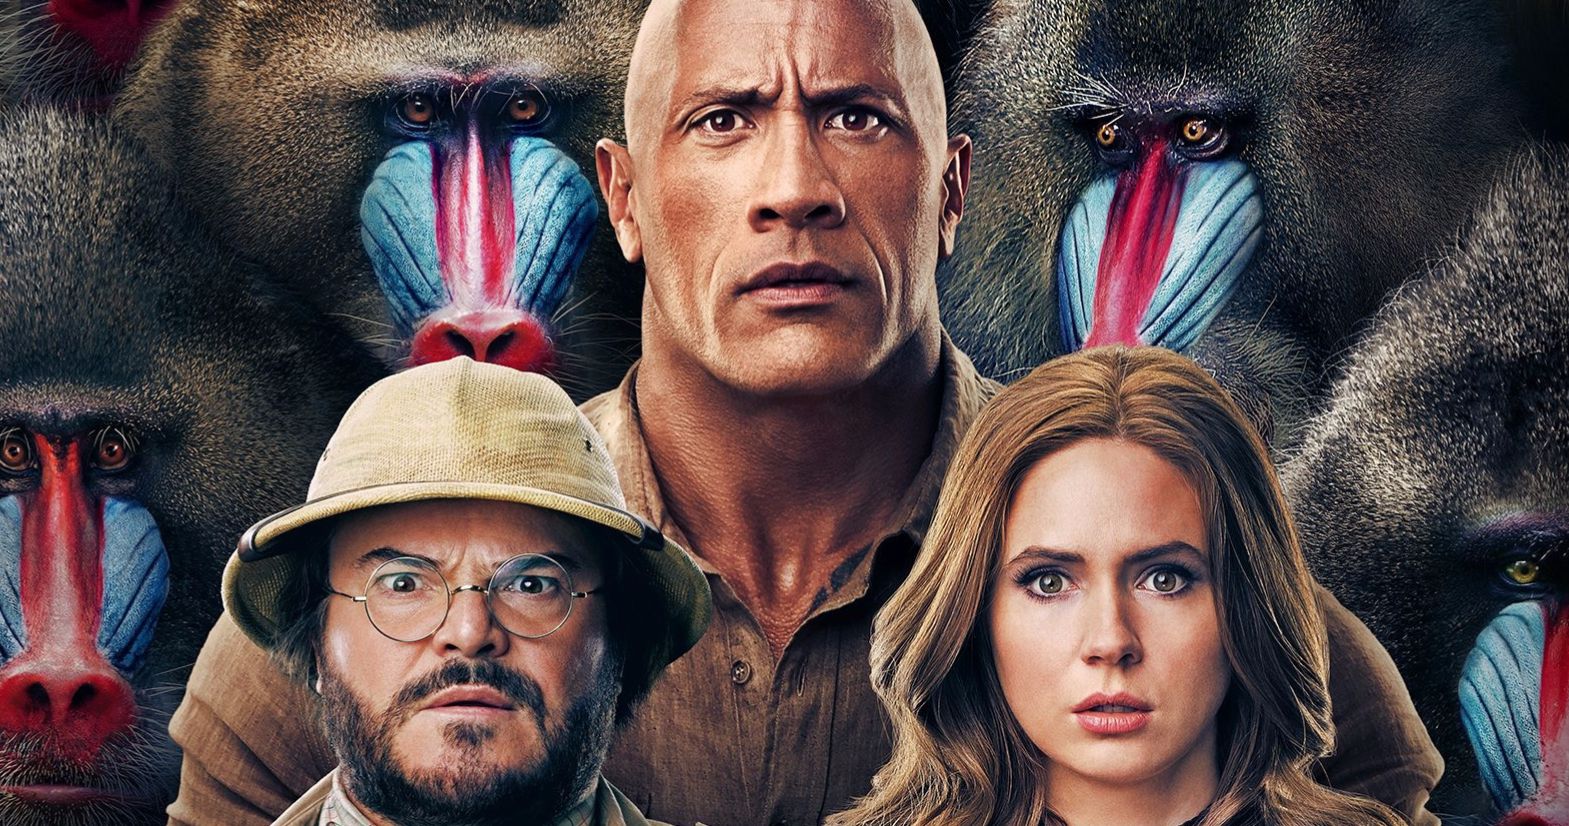 Jumanji: The Next Level IMAX Poster Has The Gang Surrounded by Baboons